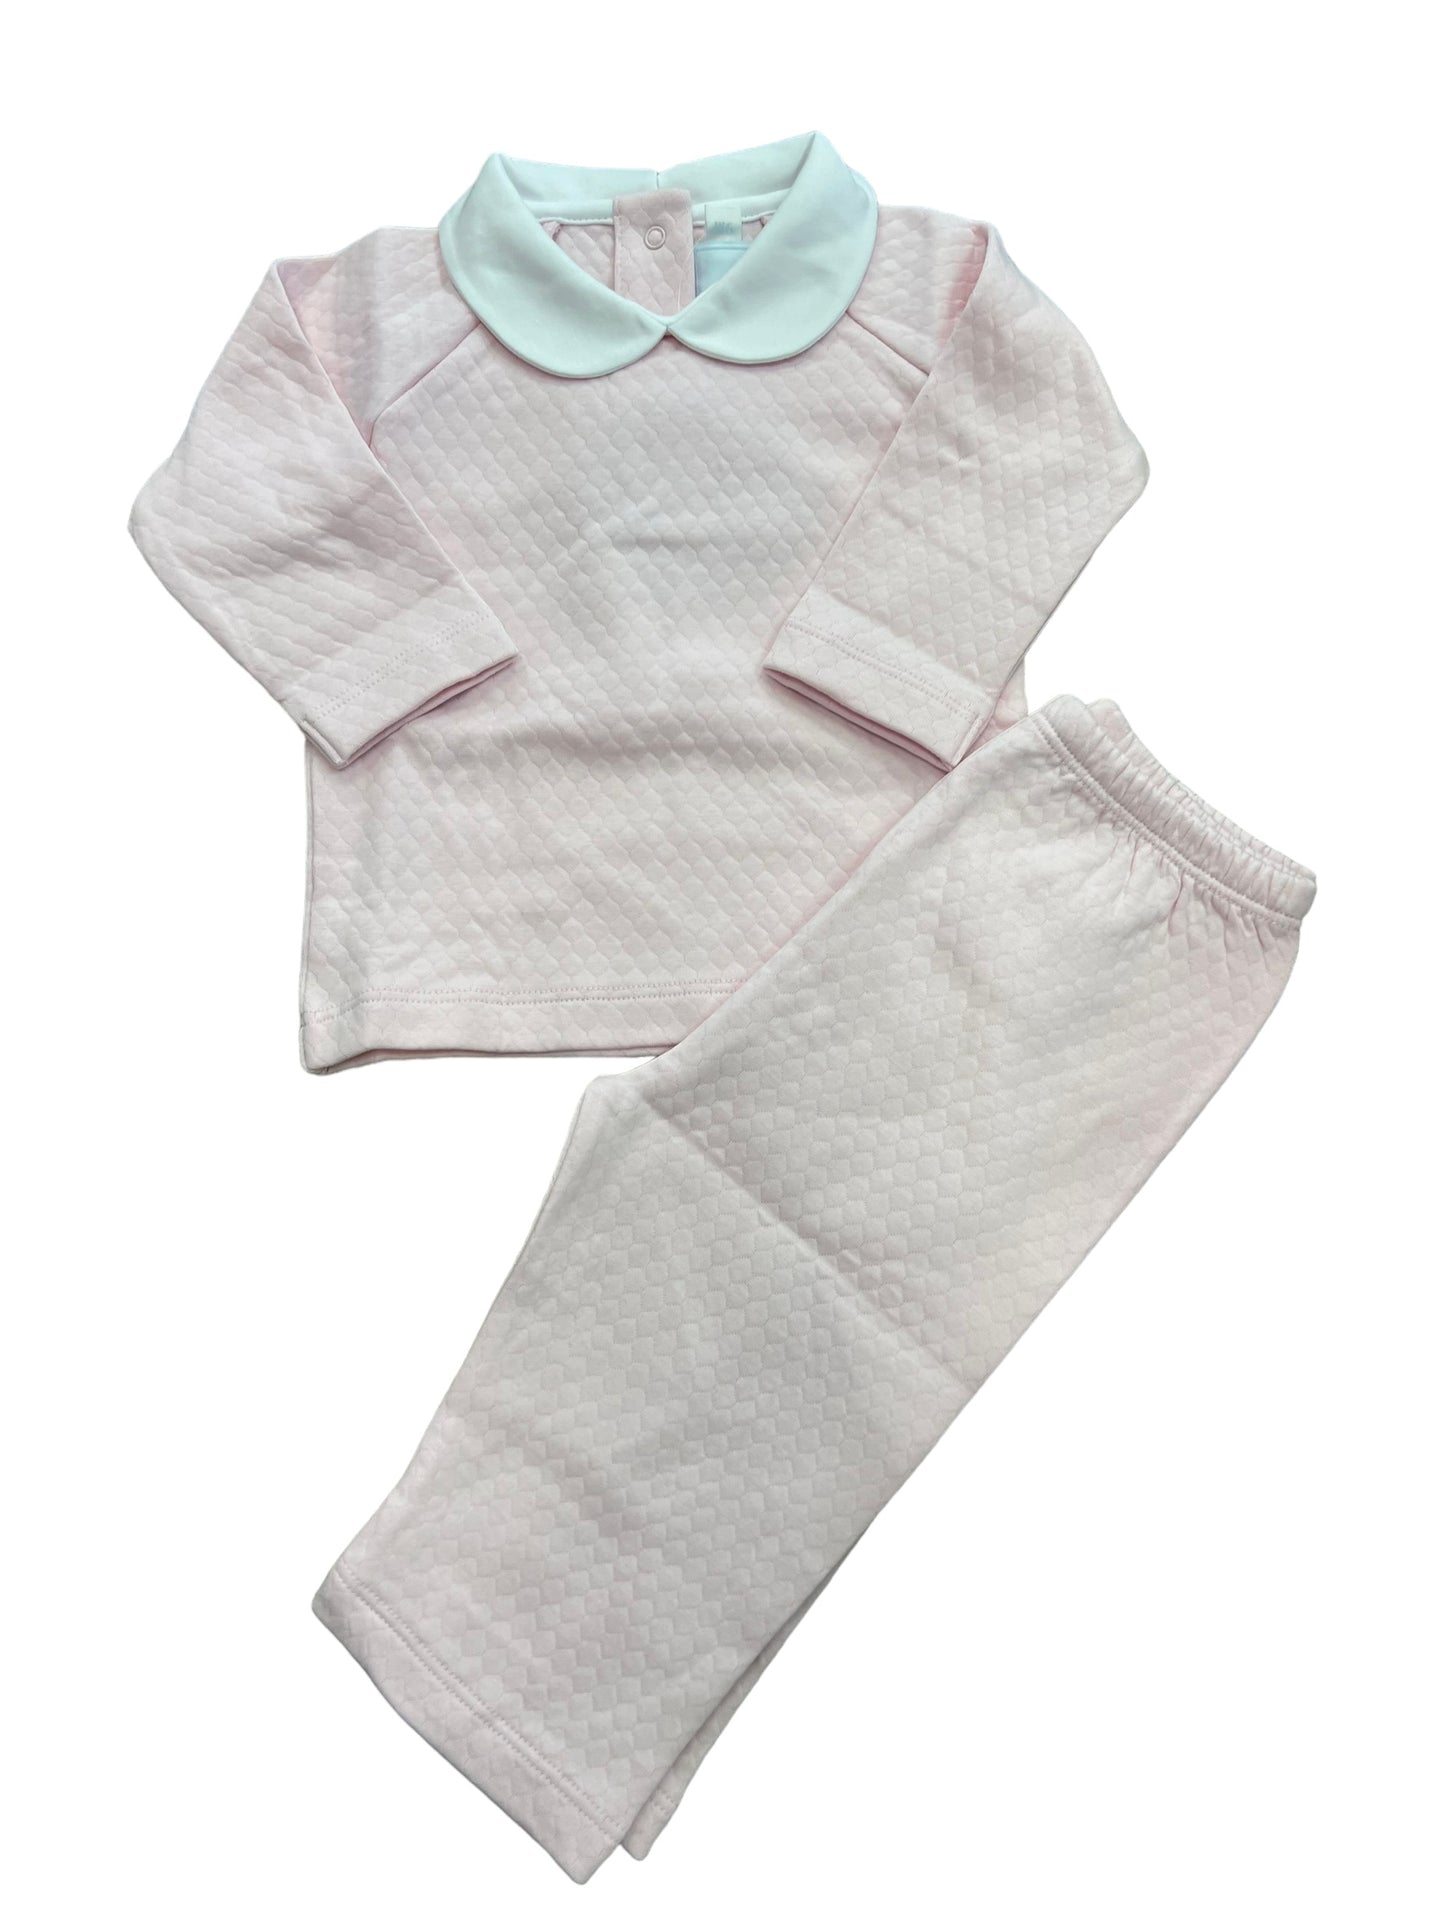 Lt pink quilted pant set